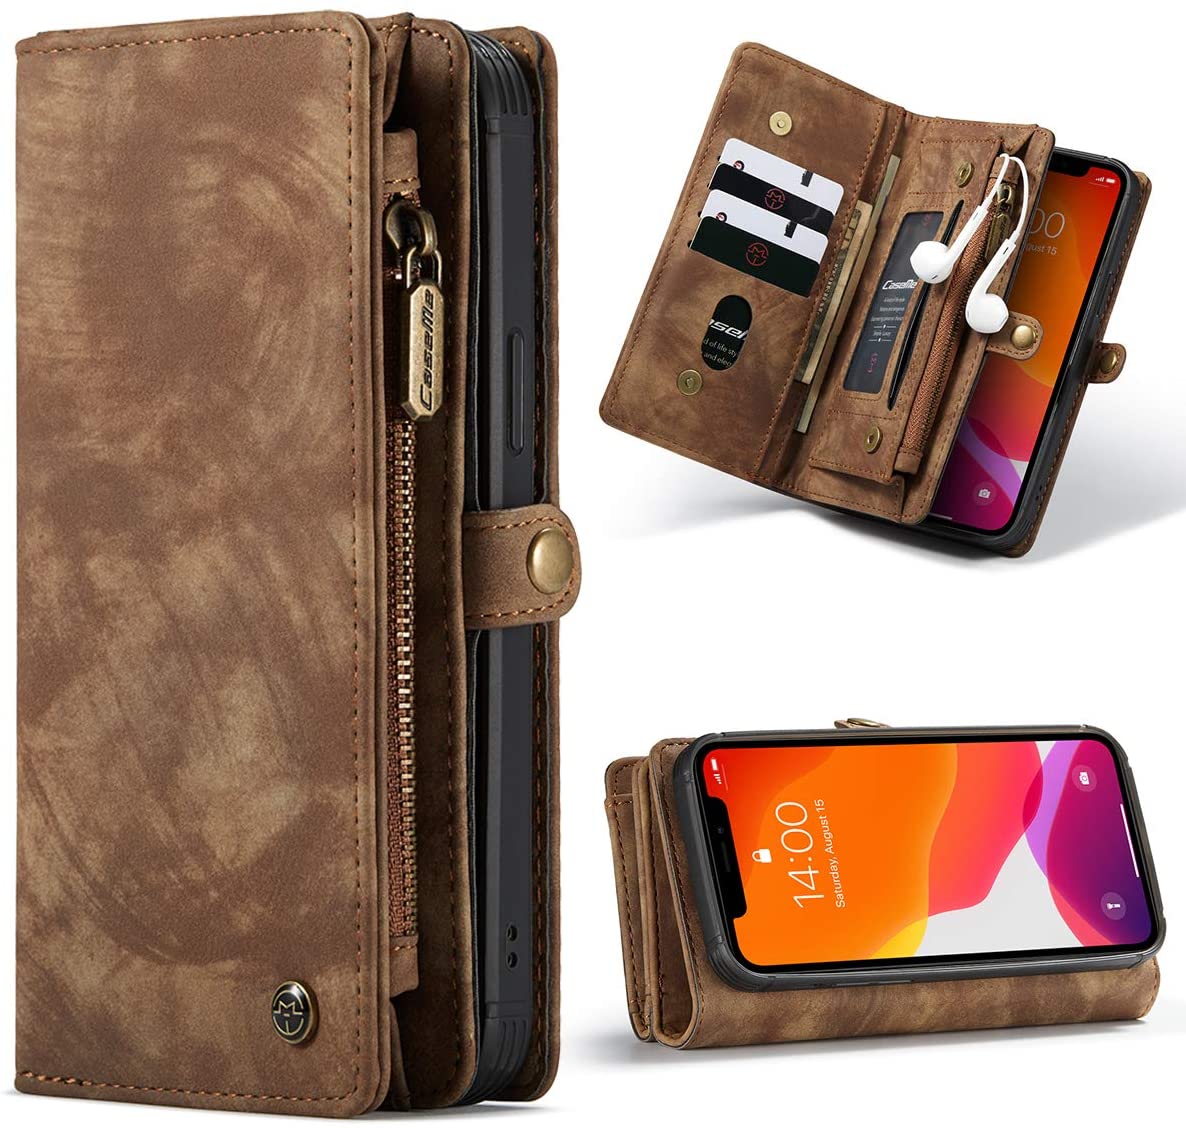 Apple iPhone 12 leather multifunctional wallet case cover by excelsior